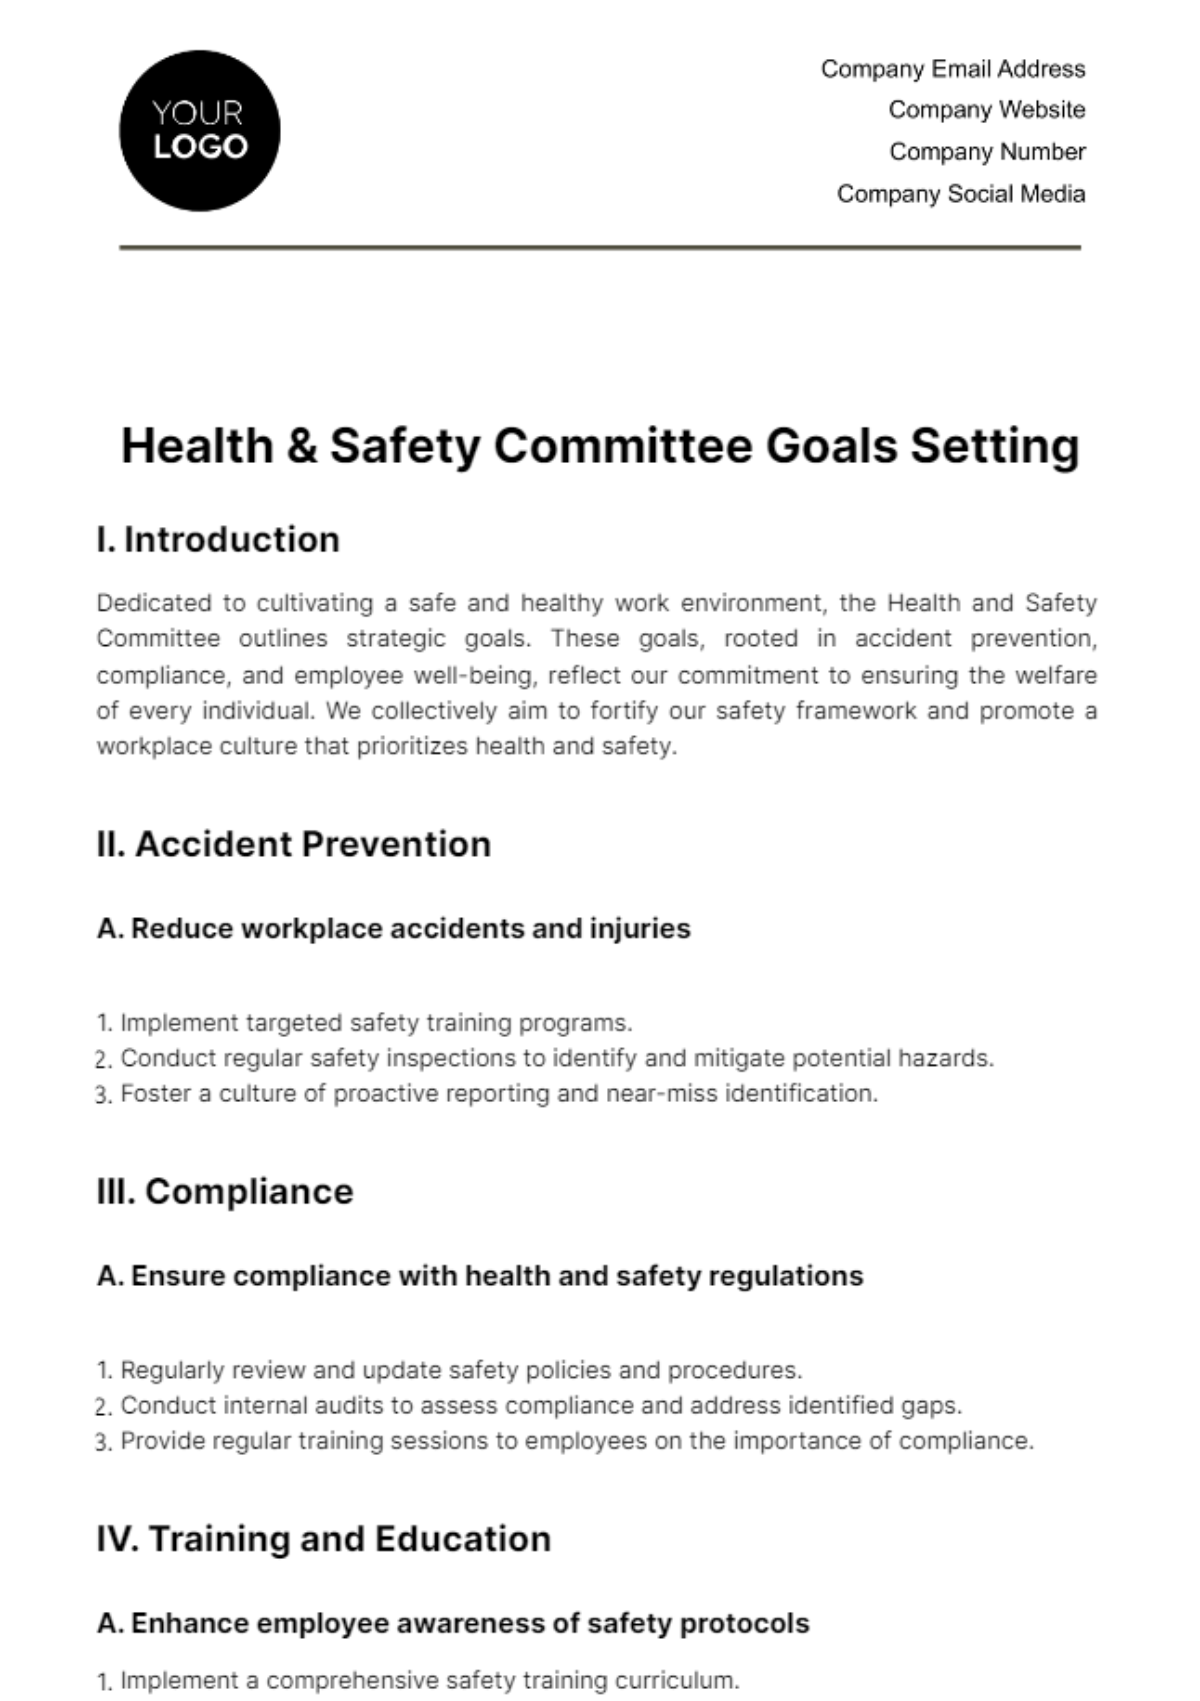 Free Health & Safety Committee Goals Setting Template